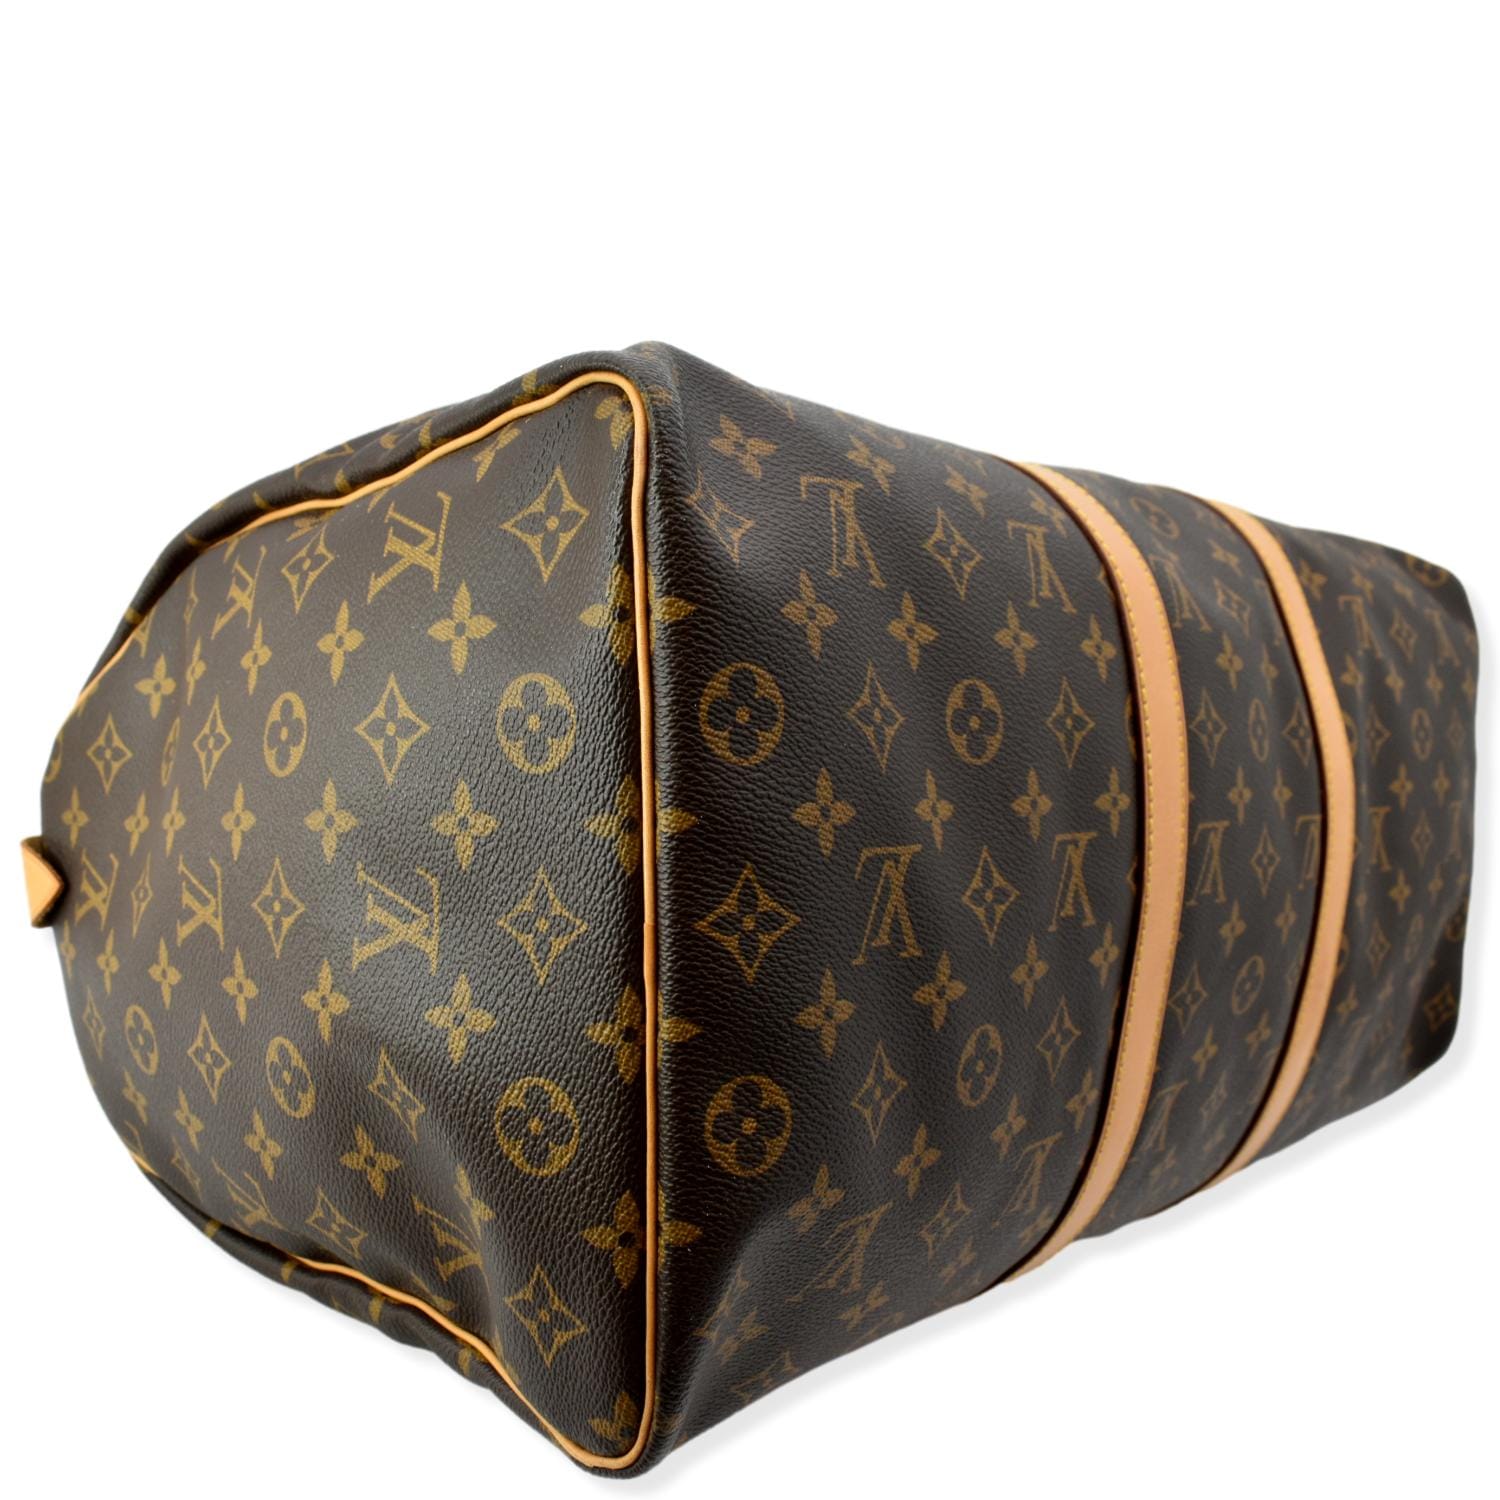 LOUIS VUITTON KEEPALL 50 TRAVEL BAG, monogram canvas with full top double  zip closure, two top handles with leather trims and leather tag with  B.T.R.W. initials, 50cm x 27cm x 22cm.